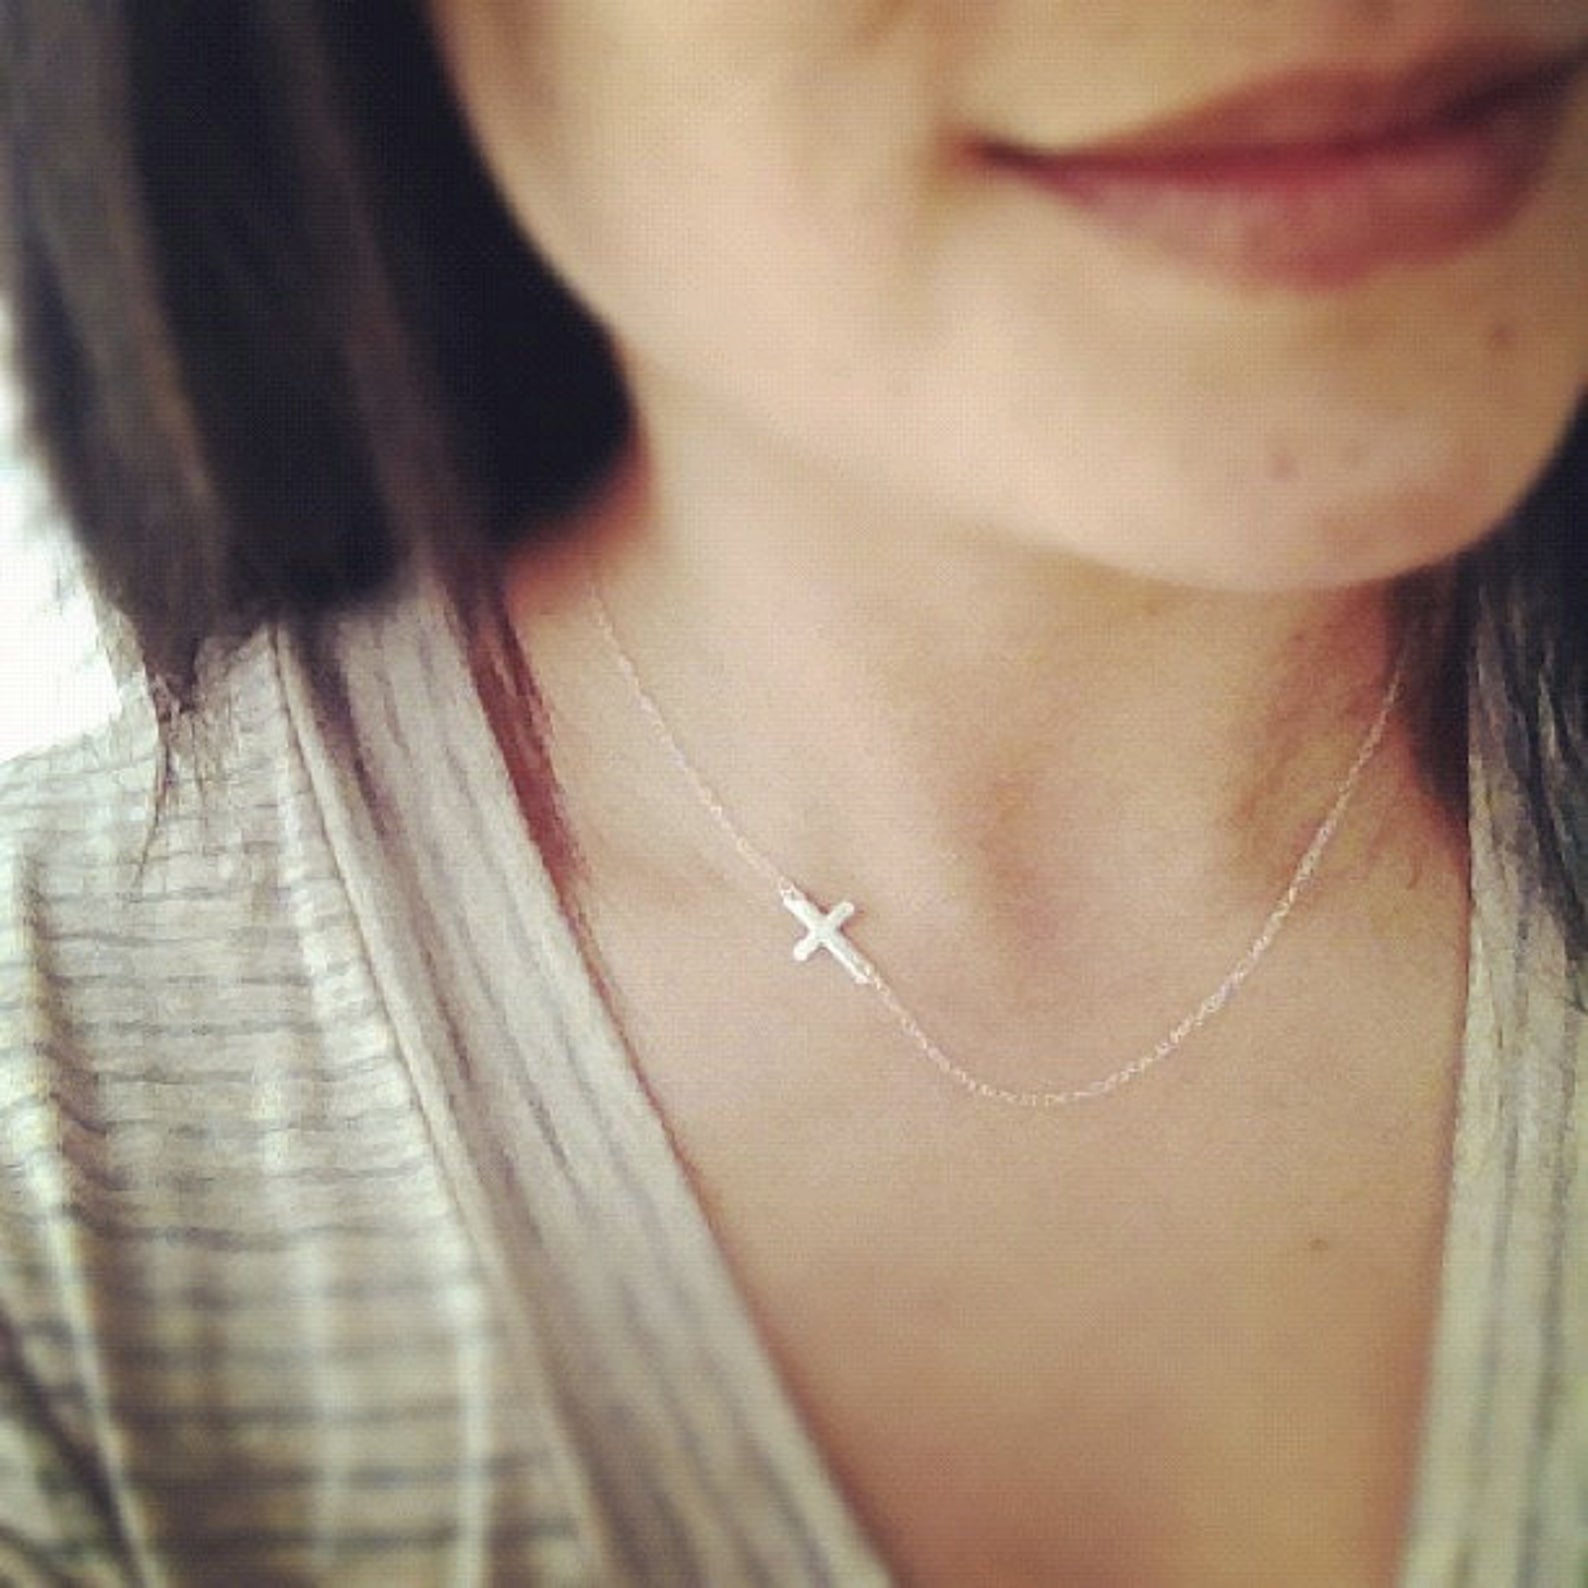 Cross Necklace, Sideways Cross Necklace, Everyday Cross Necklace, Cross Choker Necklace, Graduation Gifts, Teachers Gift Ideas, Gift For Her